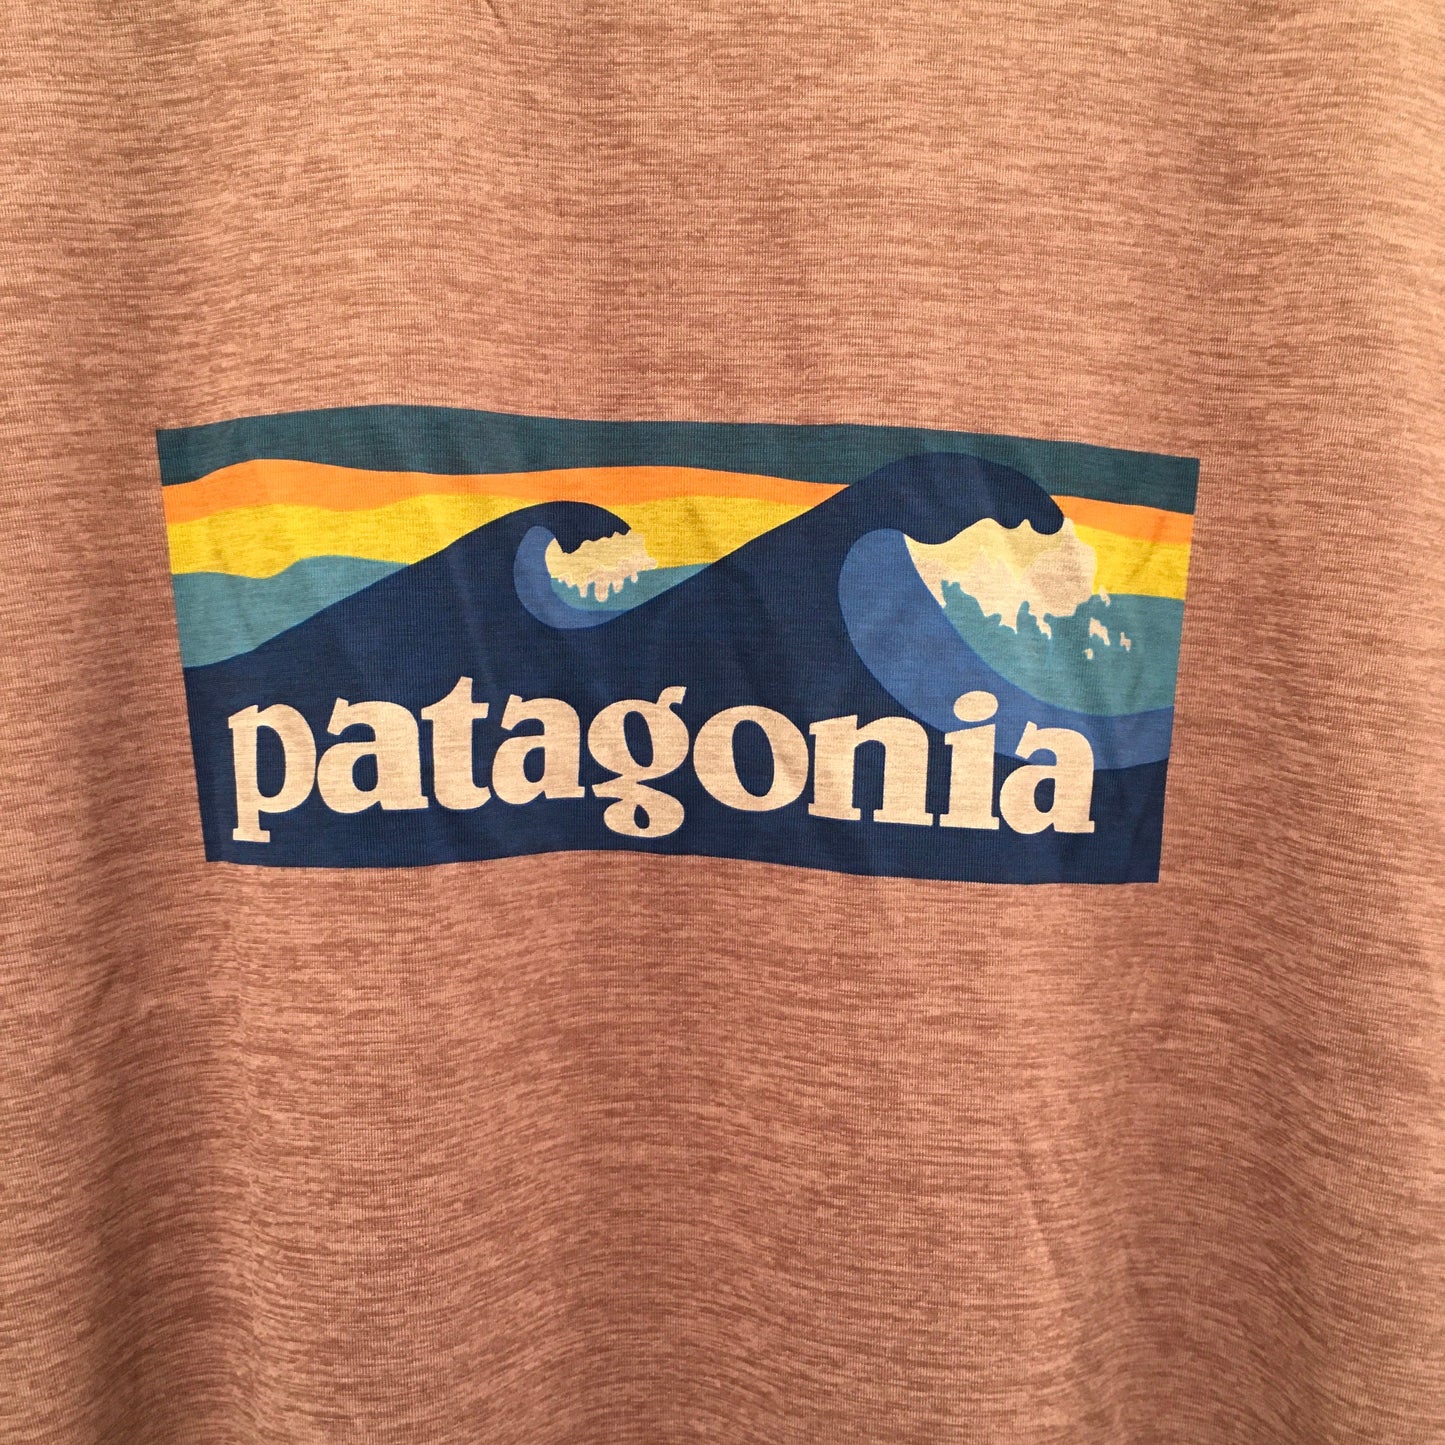 Top Short Sleeve By Patagonia  Size: Xxl